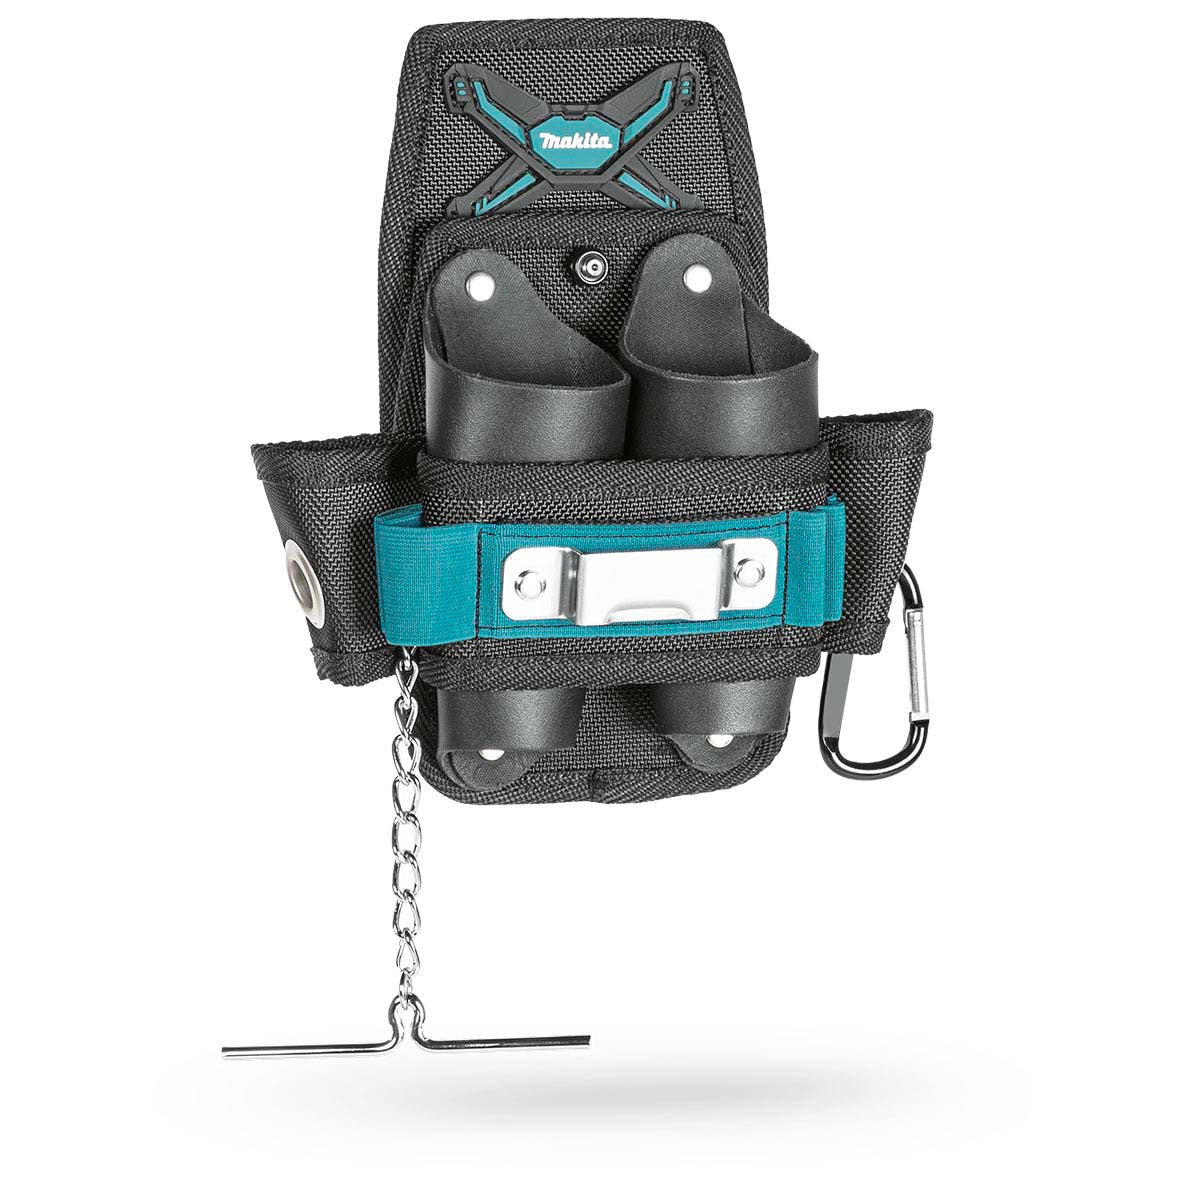 Ultimate 4-Way Electricians Holder E-05212 by Makita